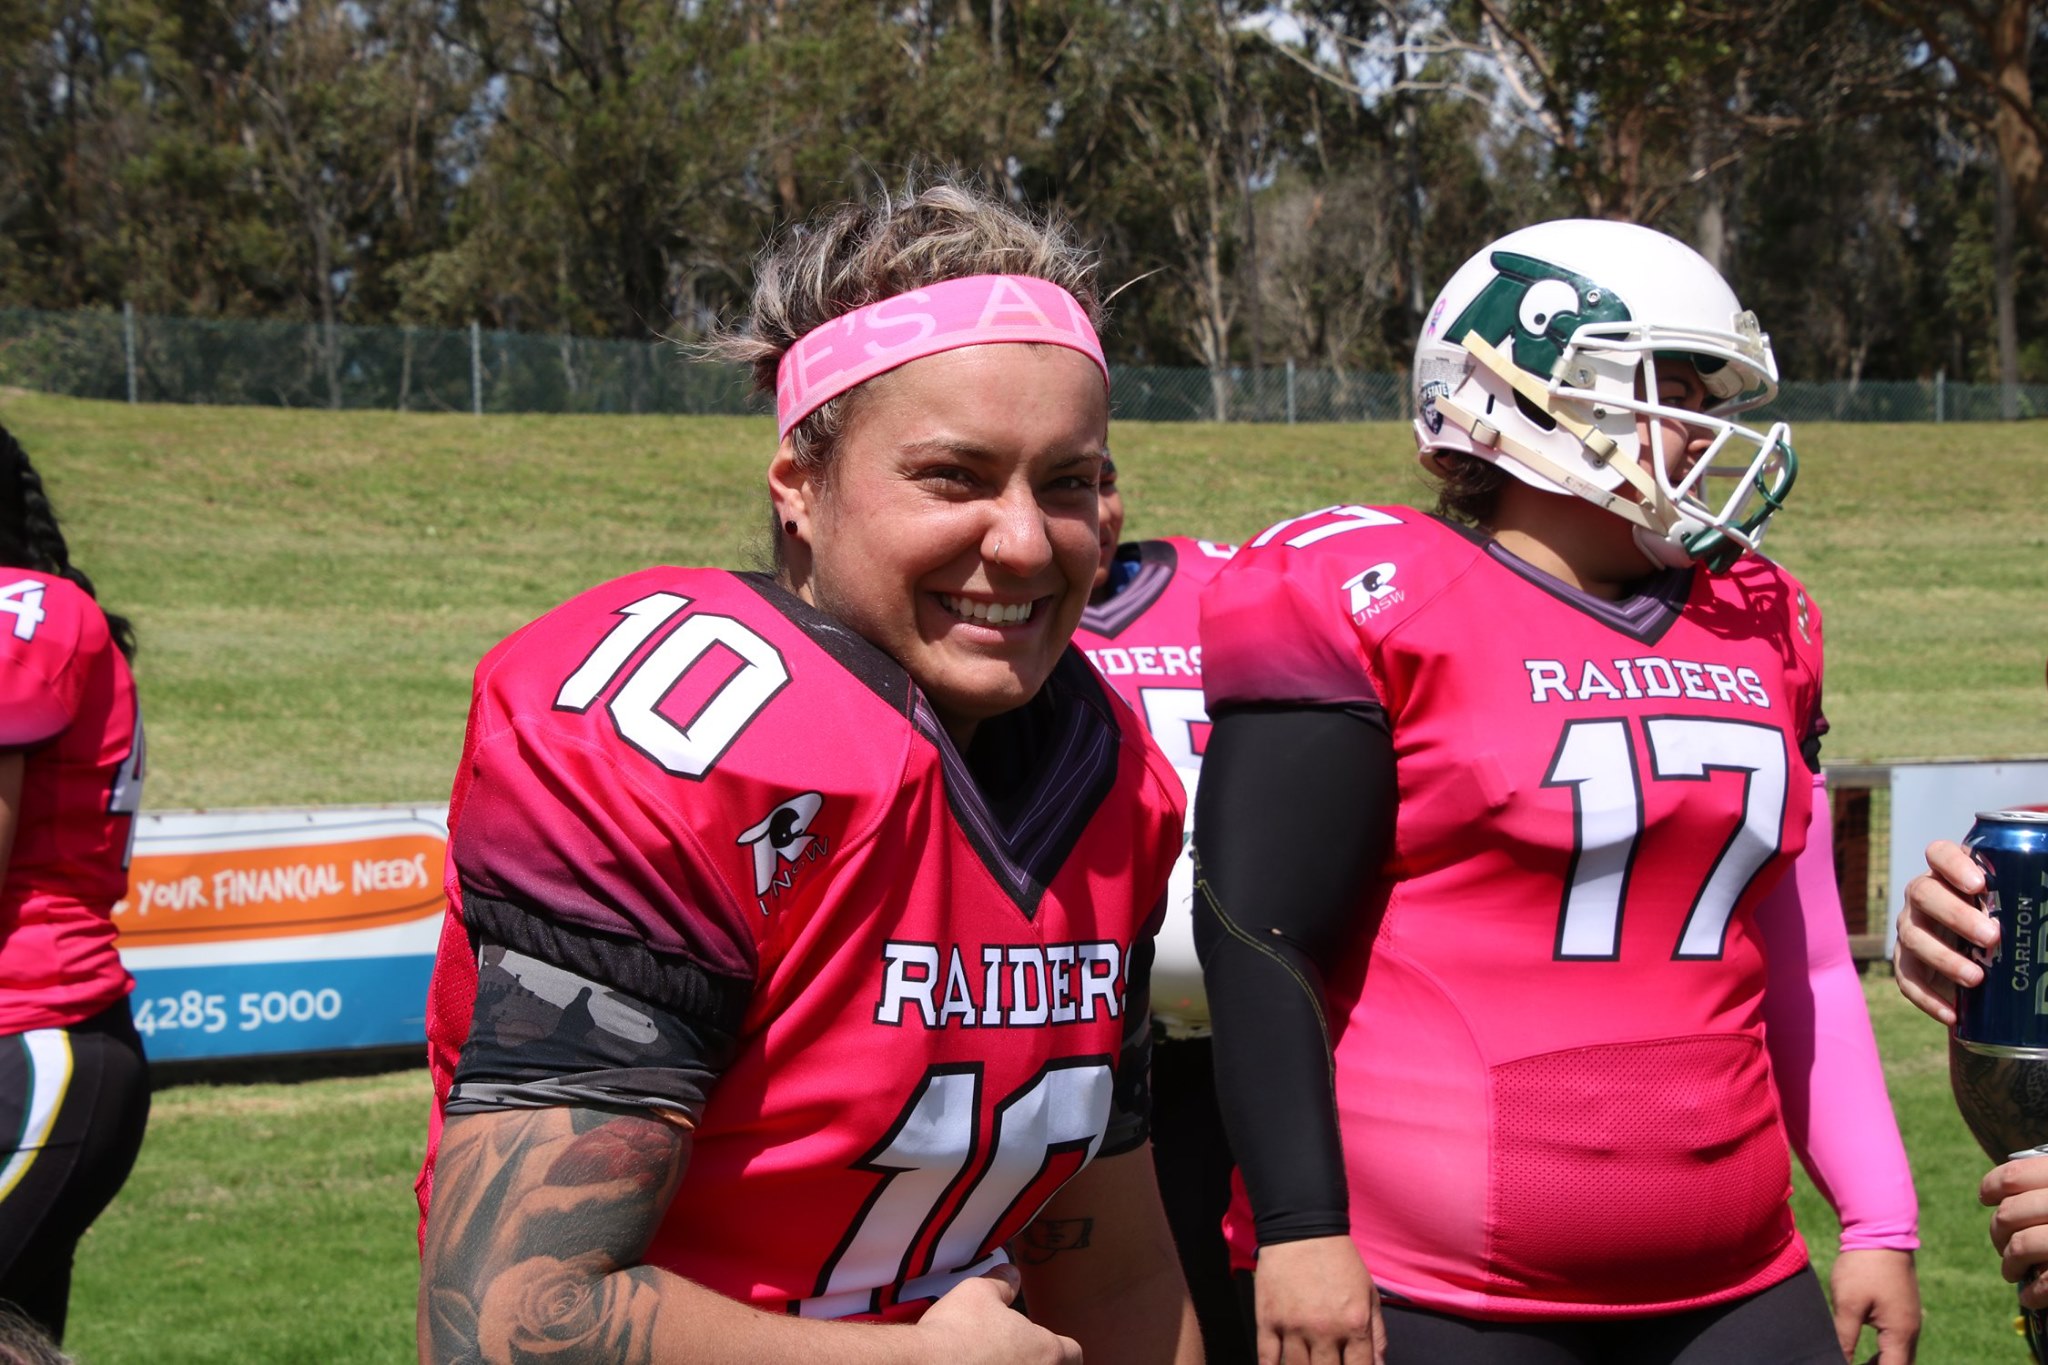 The UNSW Raiders women's team wore specially created pink jerseys to raise money for the McGrath Foundation